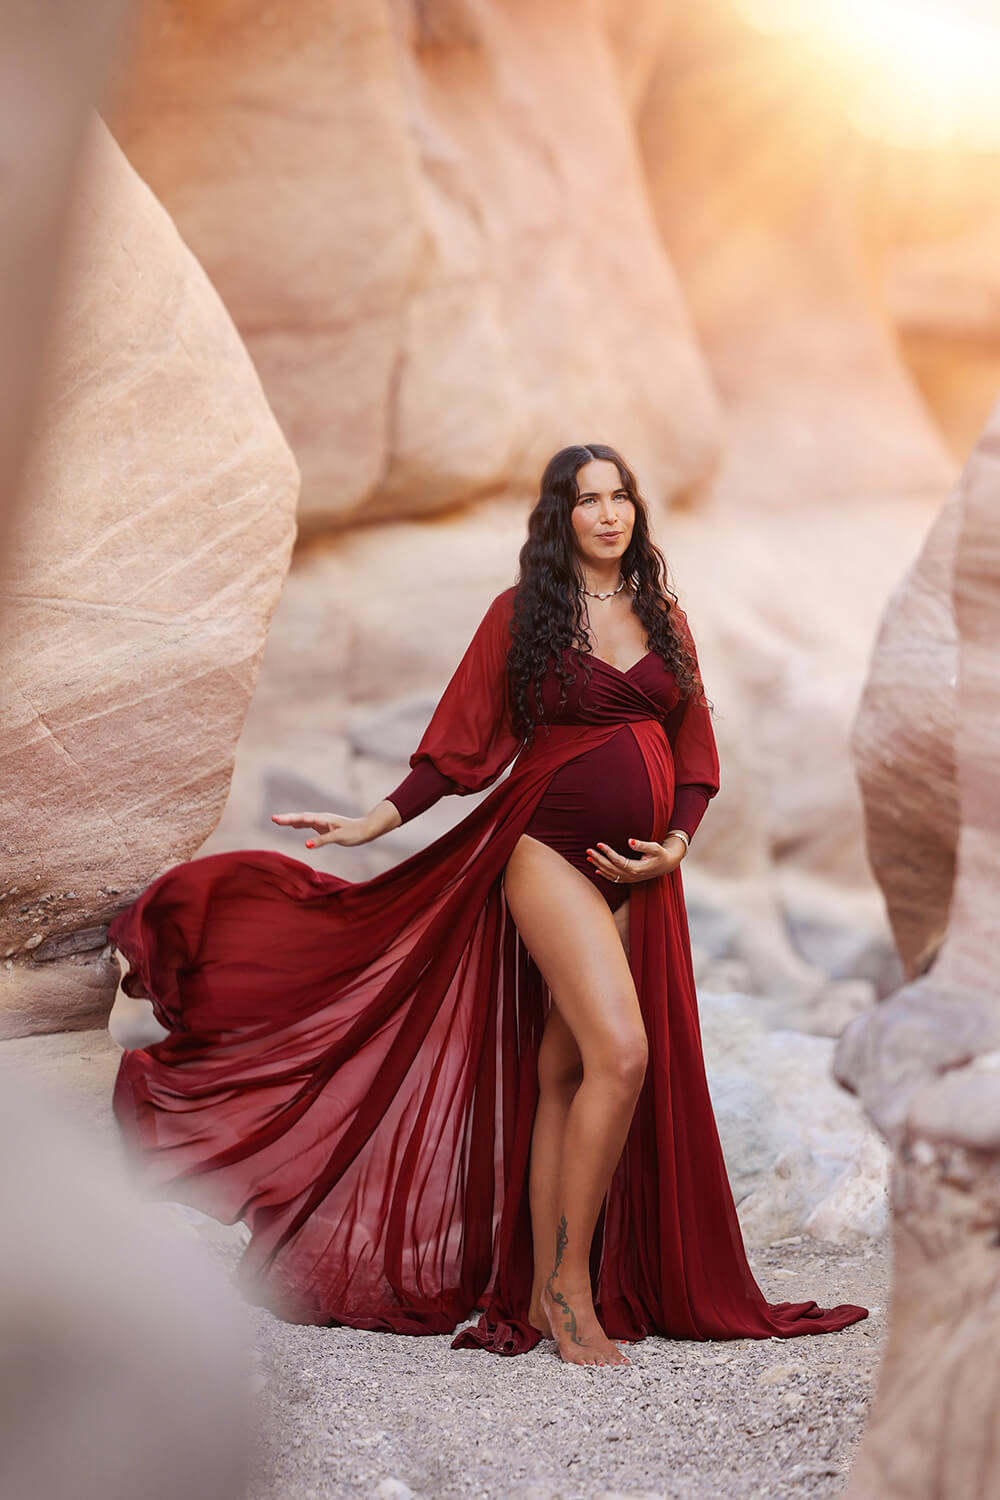 Pregnant model with long curled hair poses outside wearing a maternity outfit made of jersey and chiffon. The dress color is bordeaux and it features an adjustable sweetheart neckline and long chiffon bishop sleeves with jersey manchettes. the chiffon skirt has a split on the middle and a jersey bodysuit can be seen underneath. 